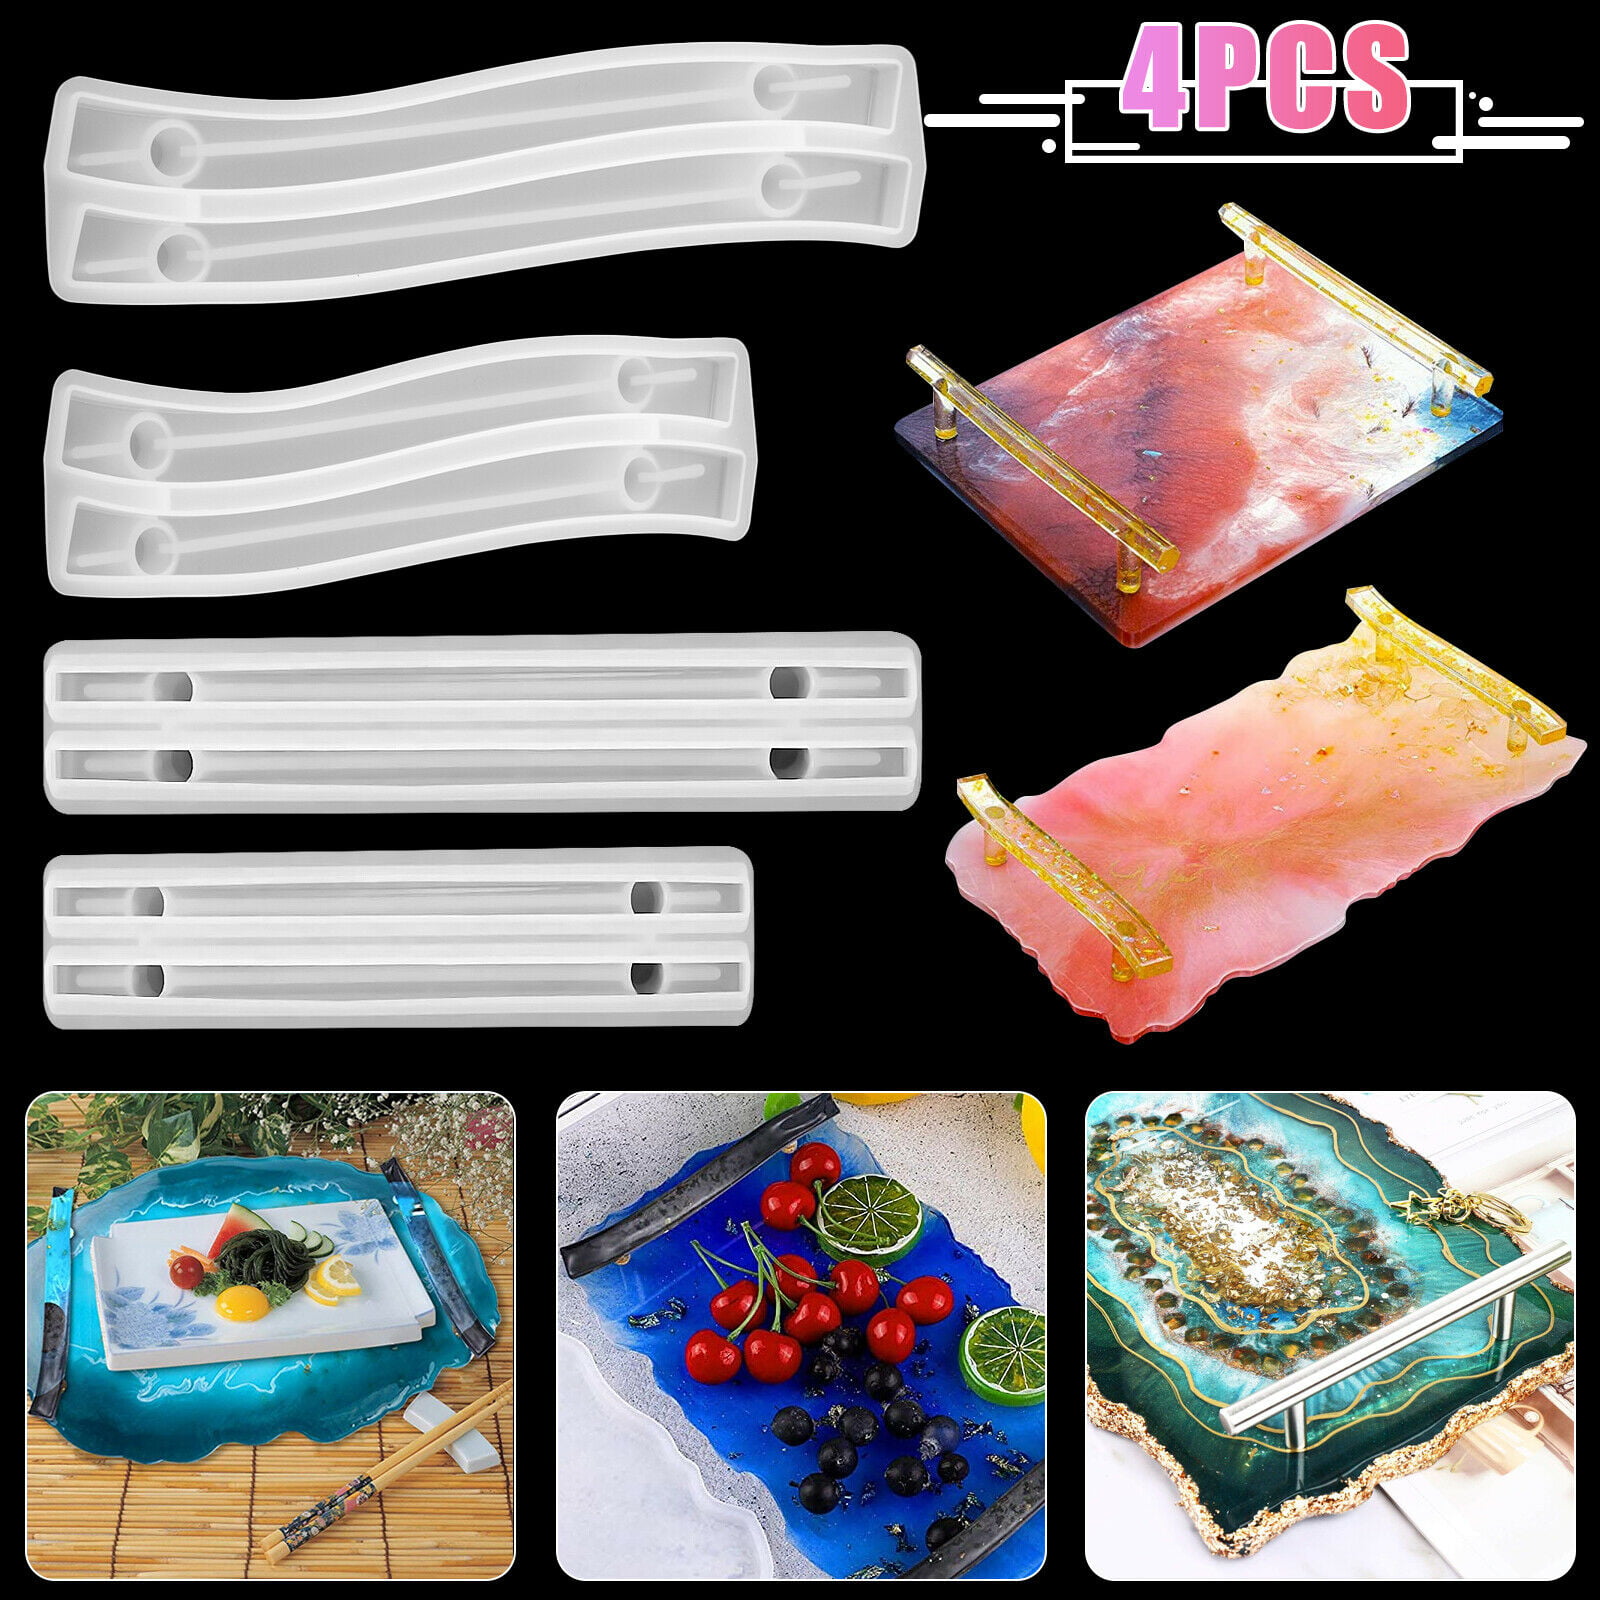 Resin Crafts Resin Craft Supplies Craft Supplies Resin 6 Cavity Bookmark Silicone Mould Resin Art Art Supplies Resin Mold